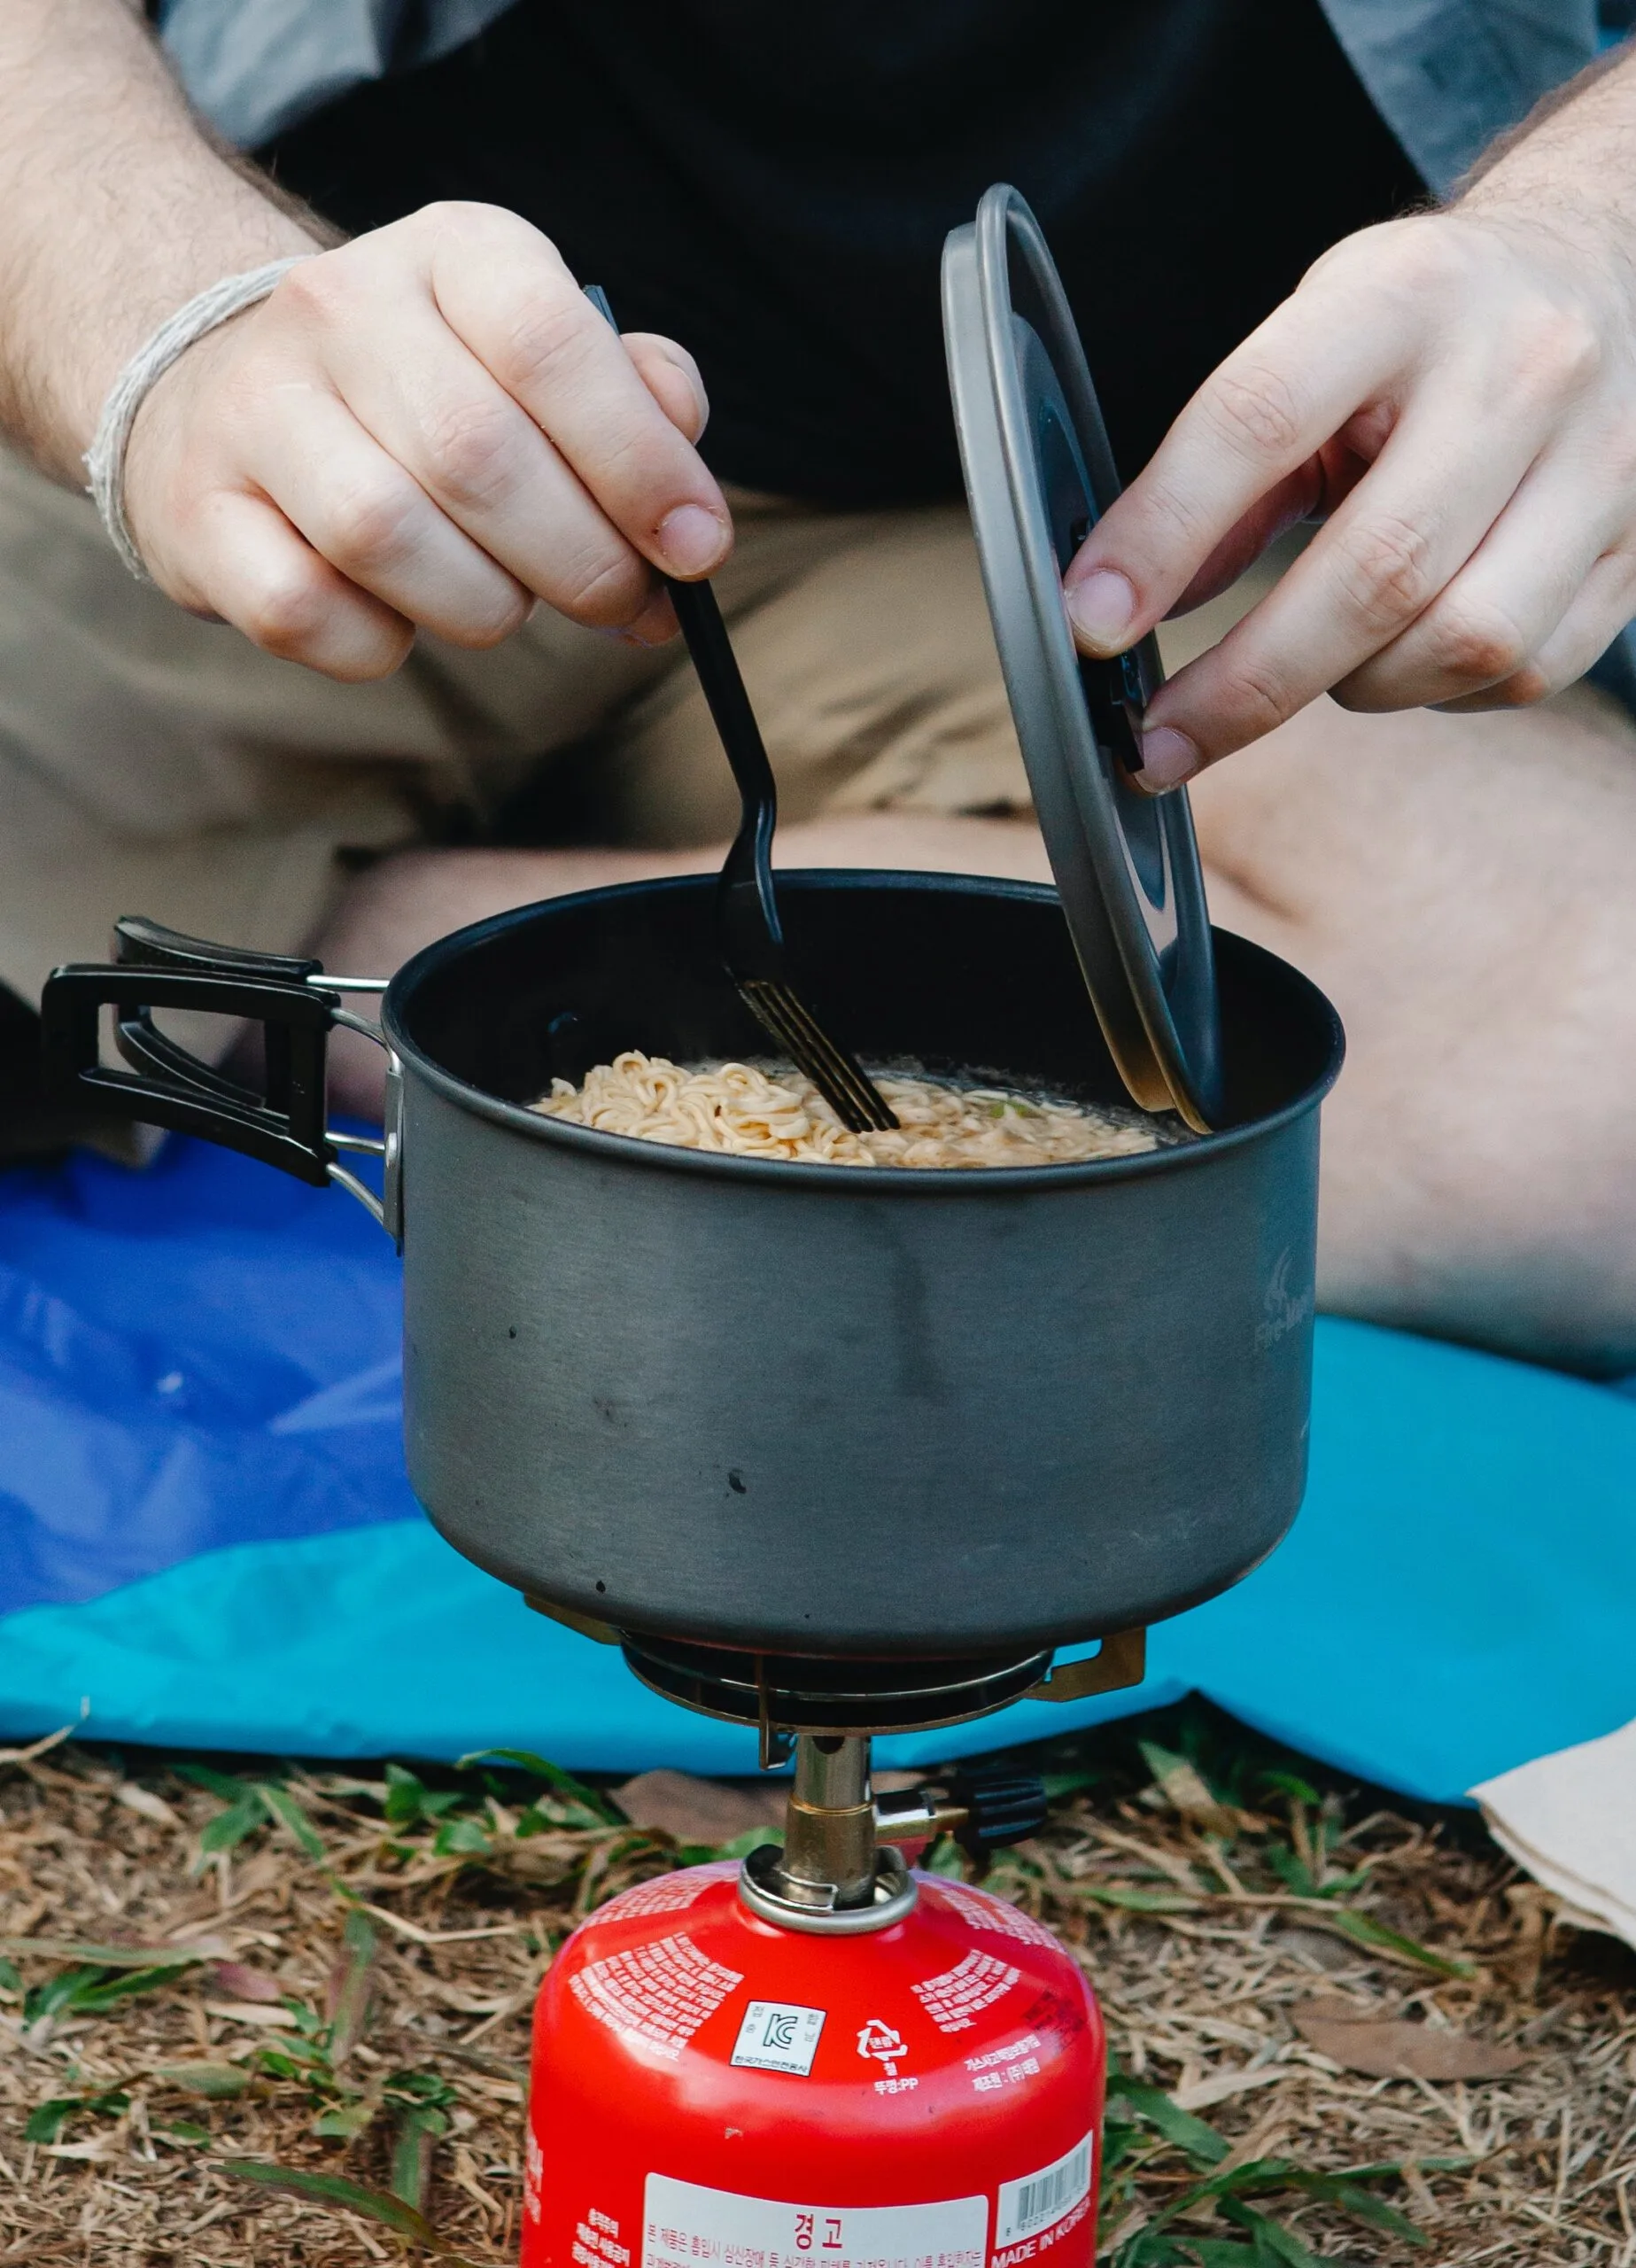 Man cooking on camping stove